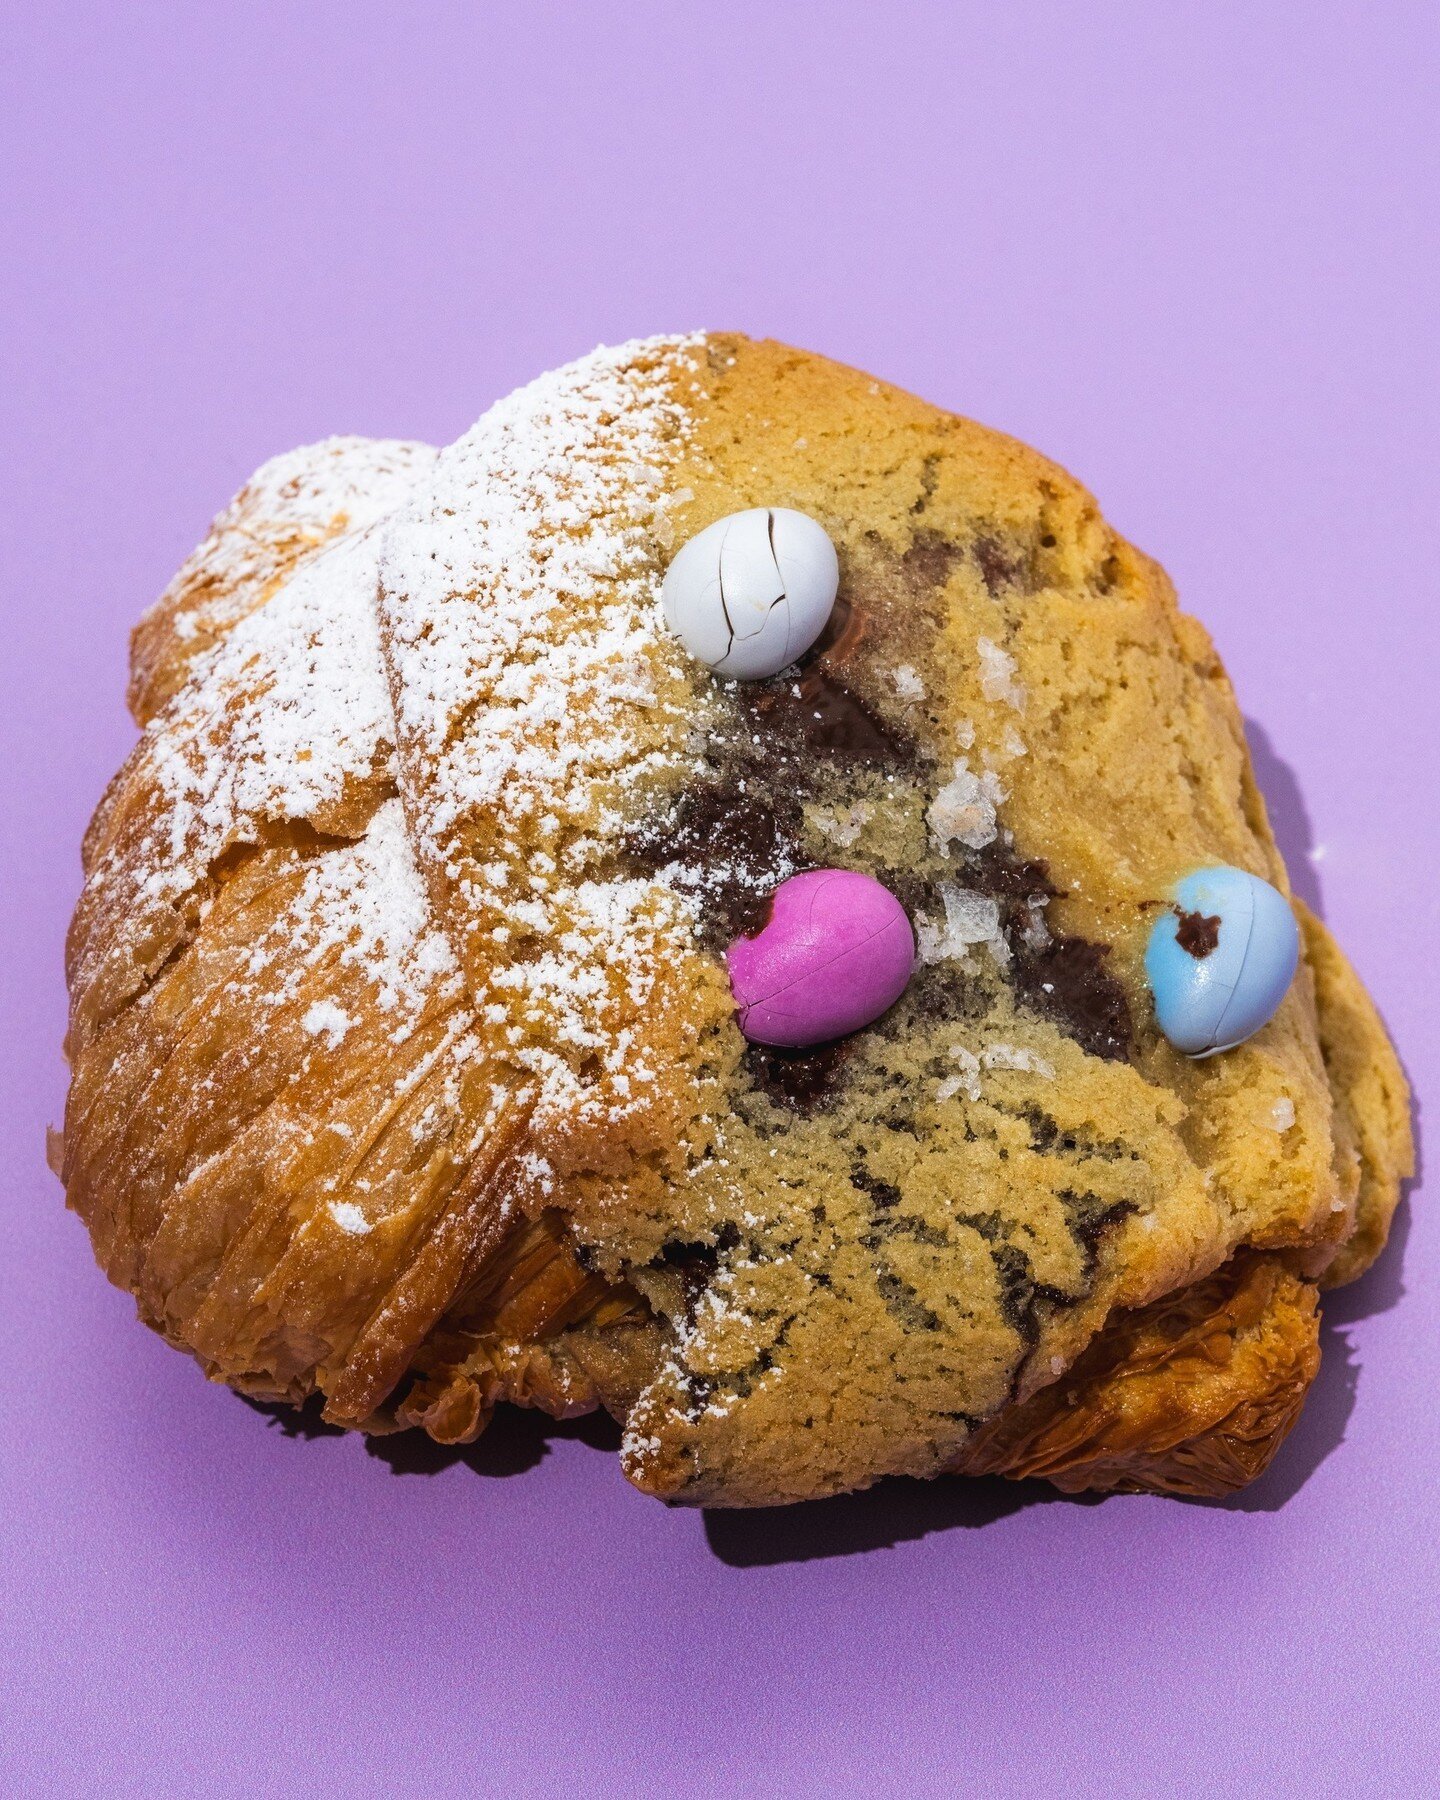 THE EGGS-CELLENT COOKIE CROISSANT! 🐣⁠
⁠
Available at the bakery starting this upcoming Monday, the cookie croissant features our classic butter croissant filled with Valrhona chocolate chip cookie dough and topped with more cookie dough and milk cho